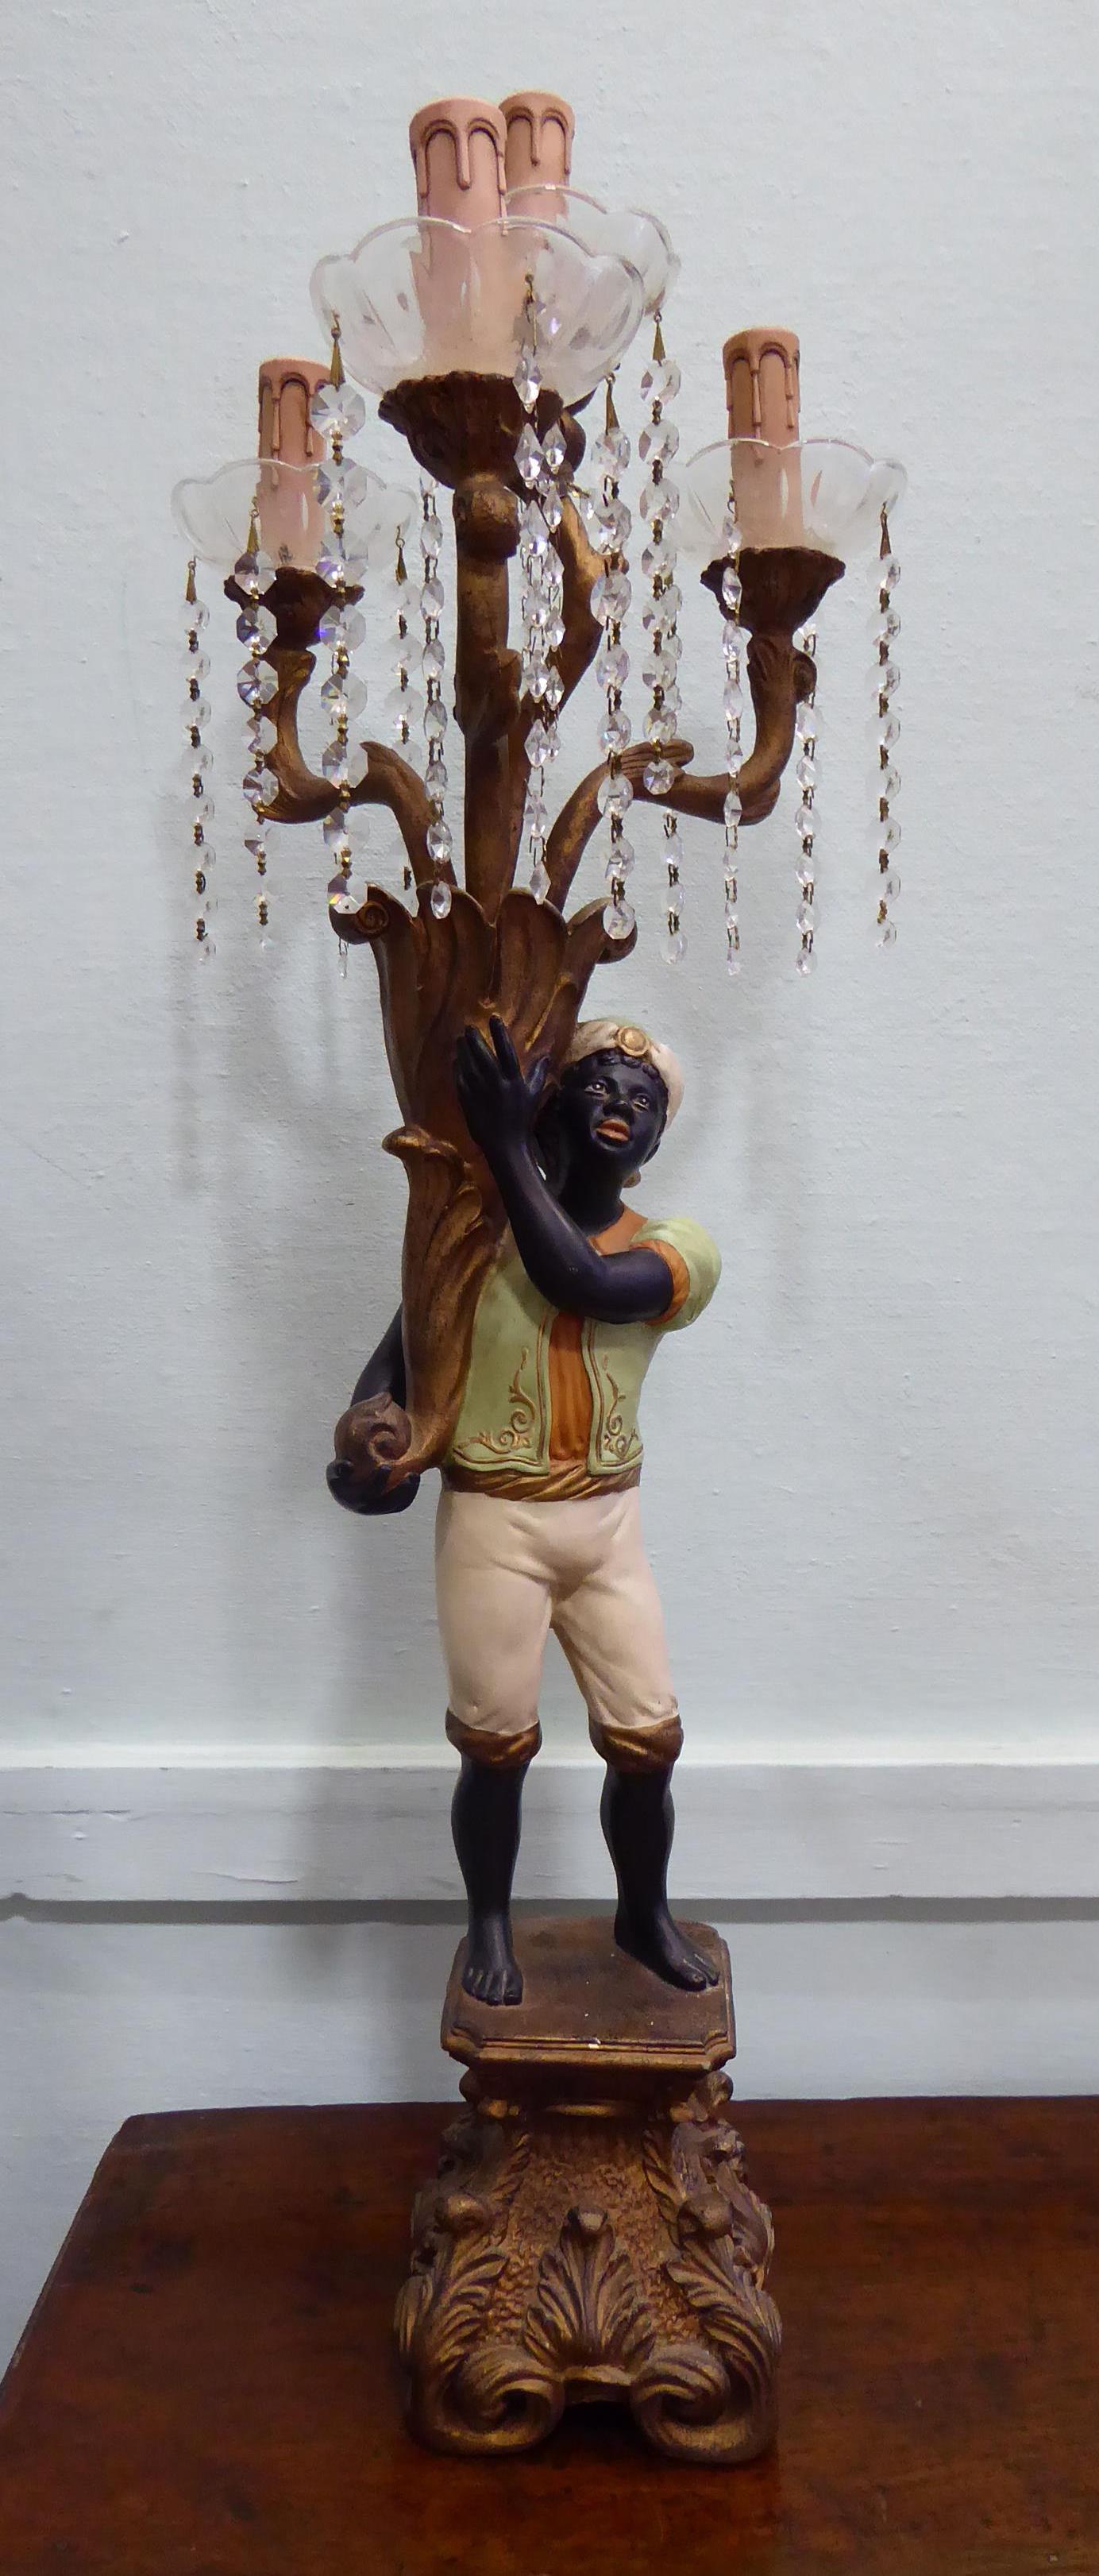 A 19thC style blackamoor table lamp, the standing figure elevating a cornucopia and four,